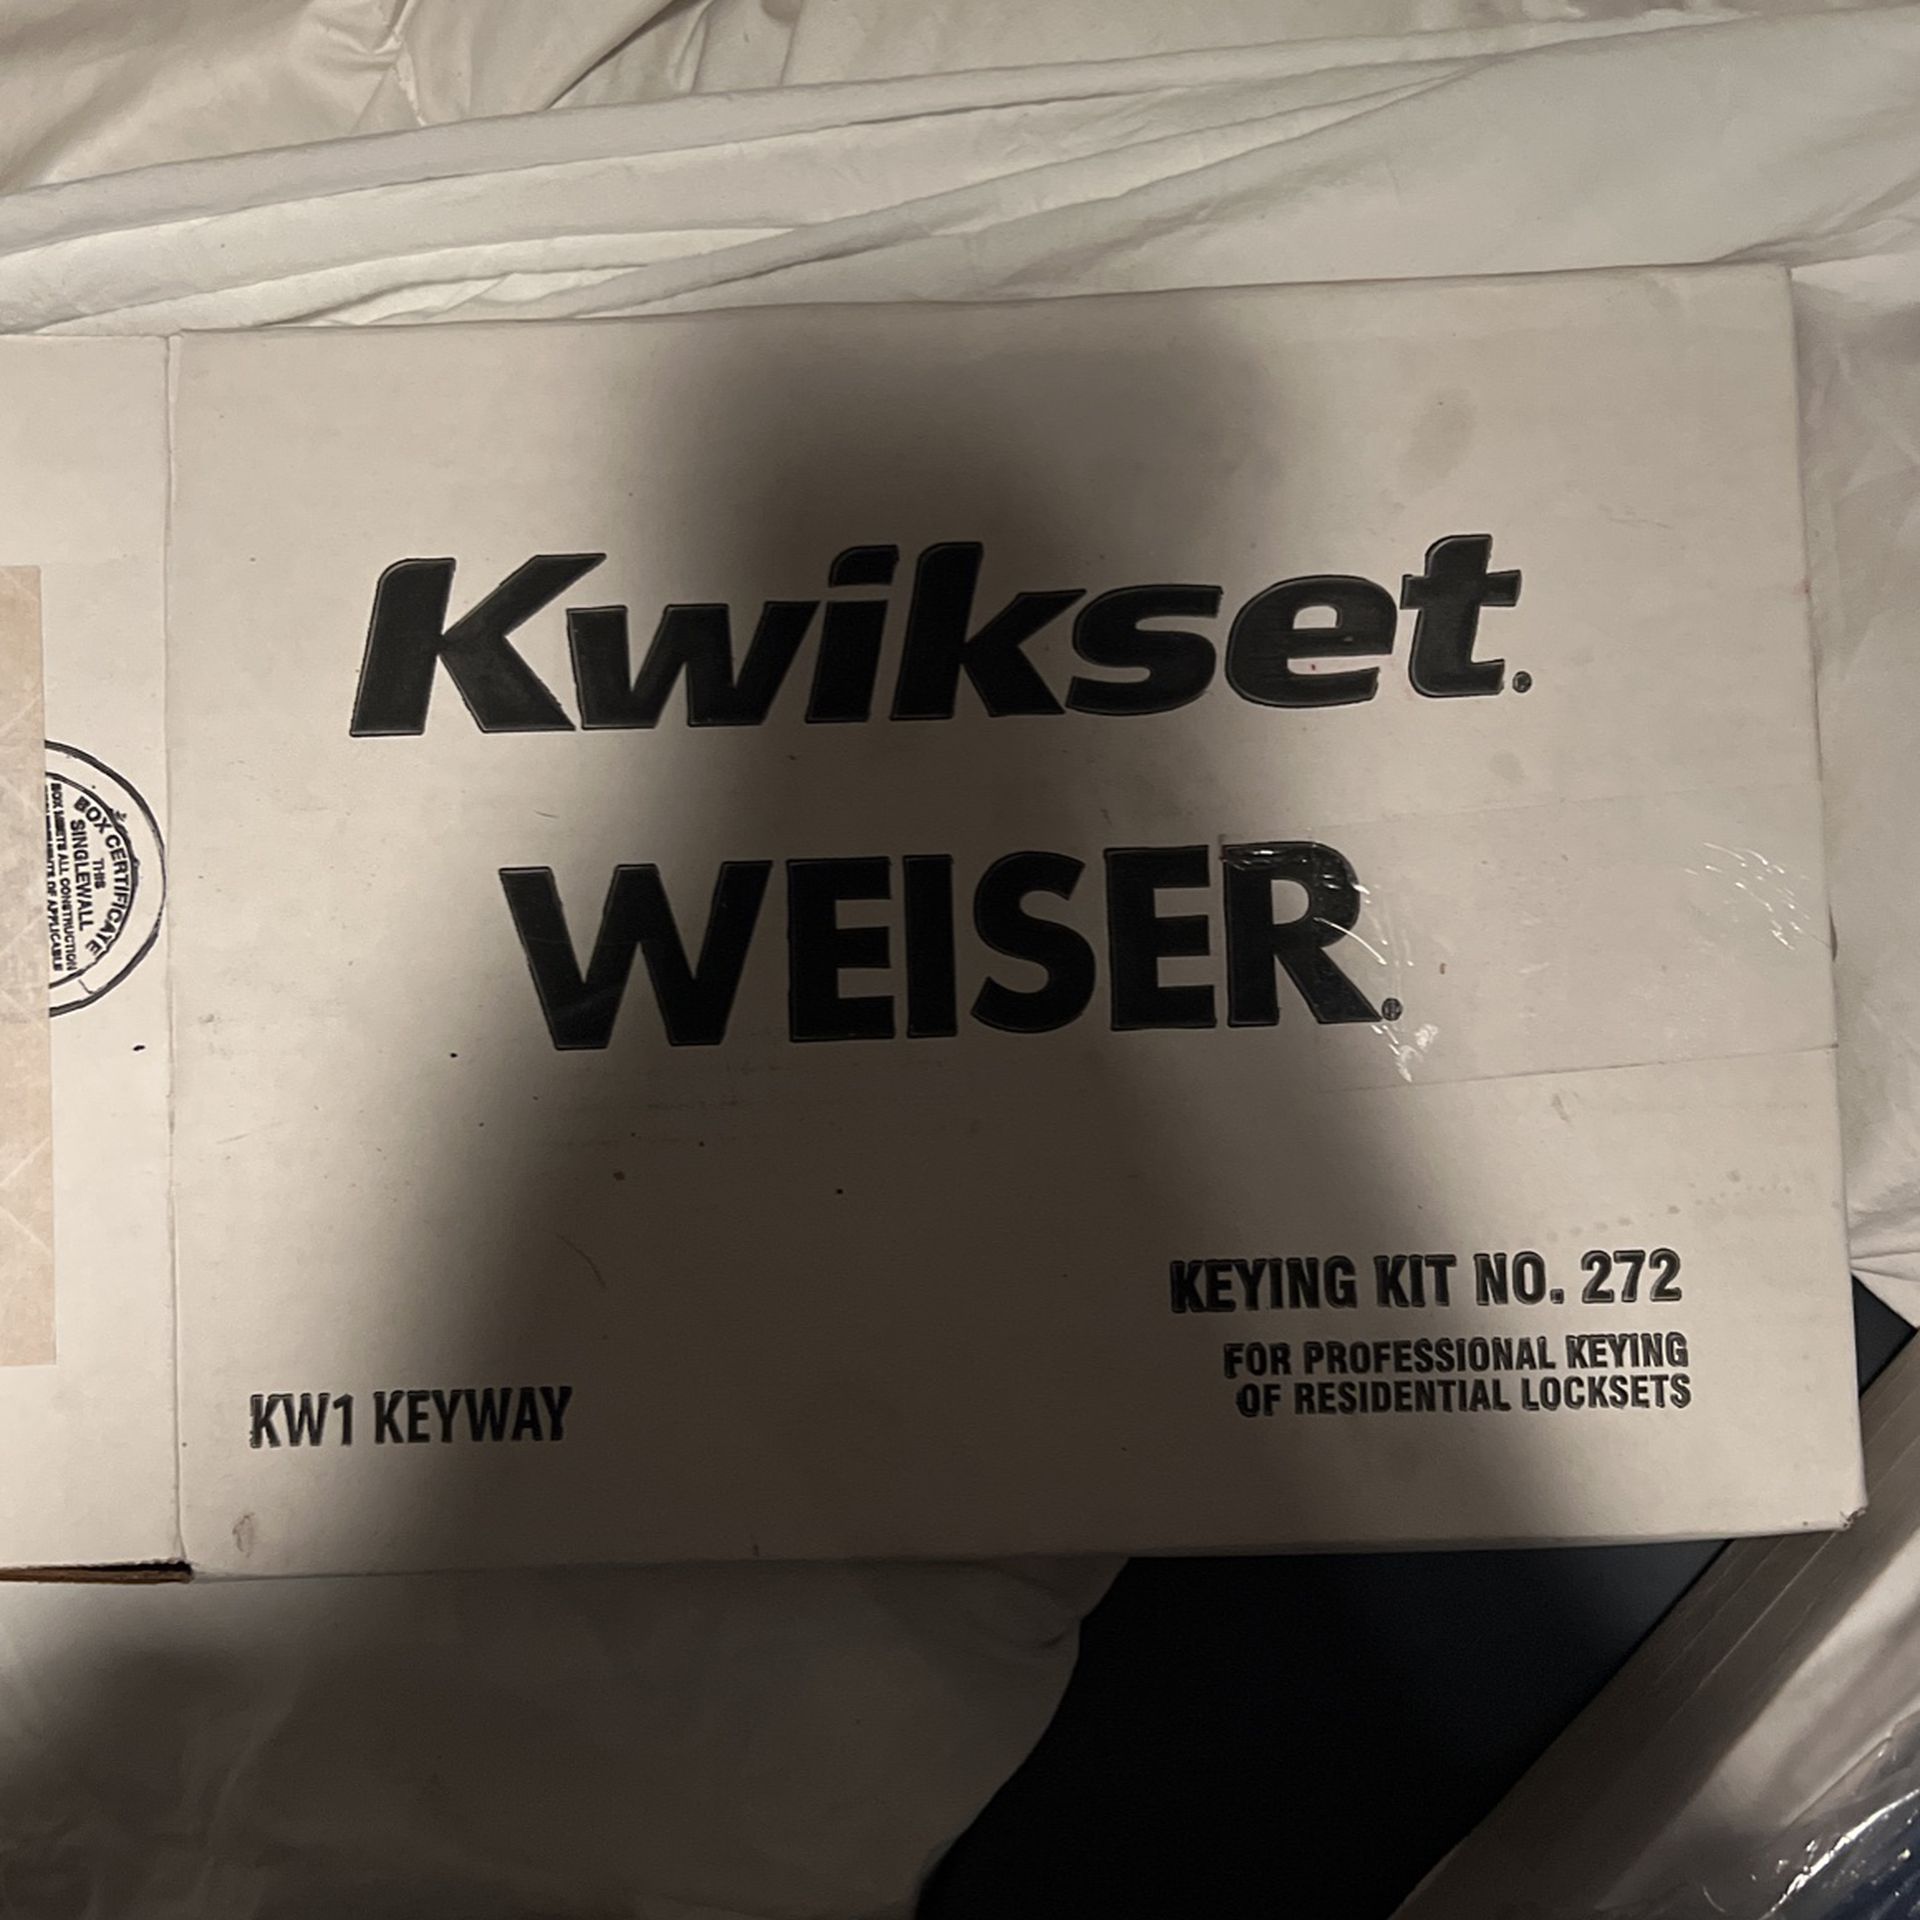 Schlage Retail Key Kit (NEW) And Kwikset Weiser Keying Kit No. 272 (NEW)  for Sale in Riverside County, CA OfferUp